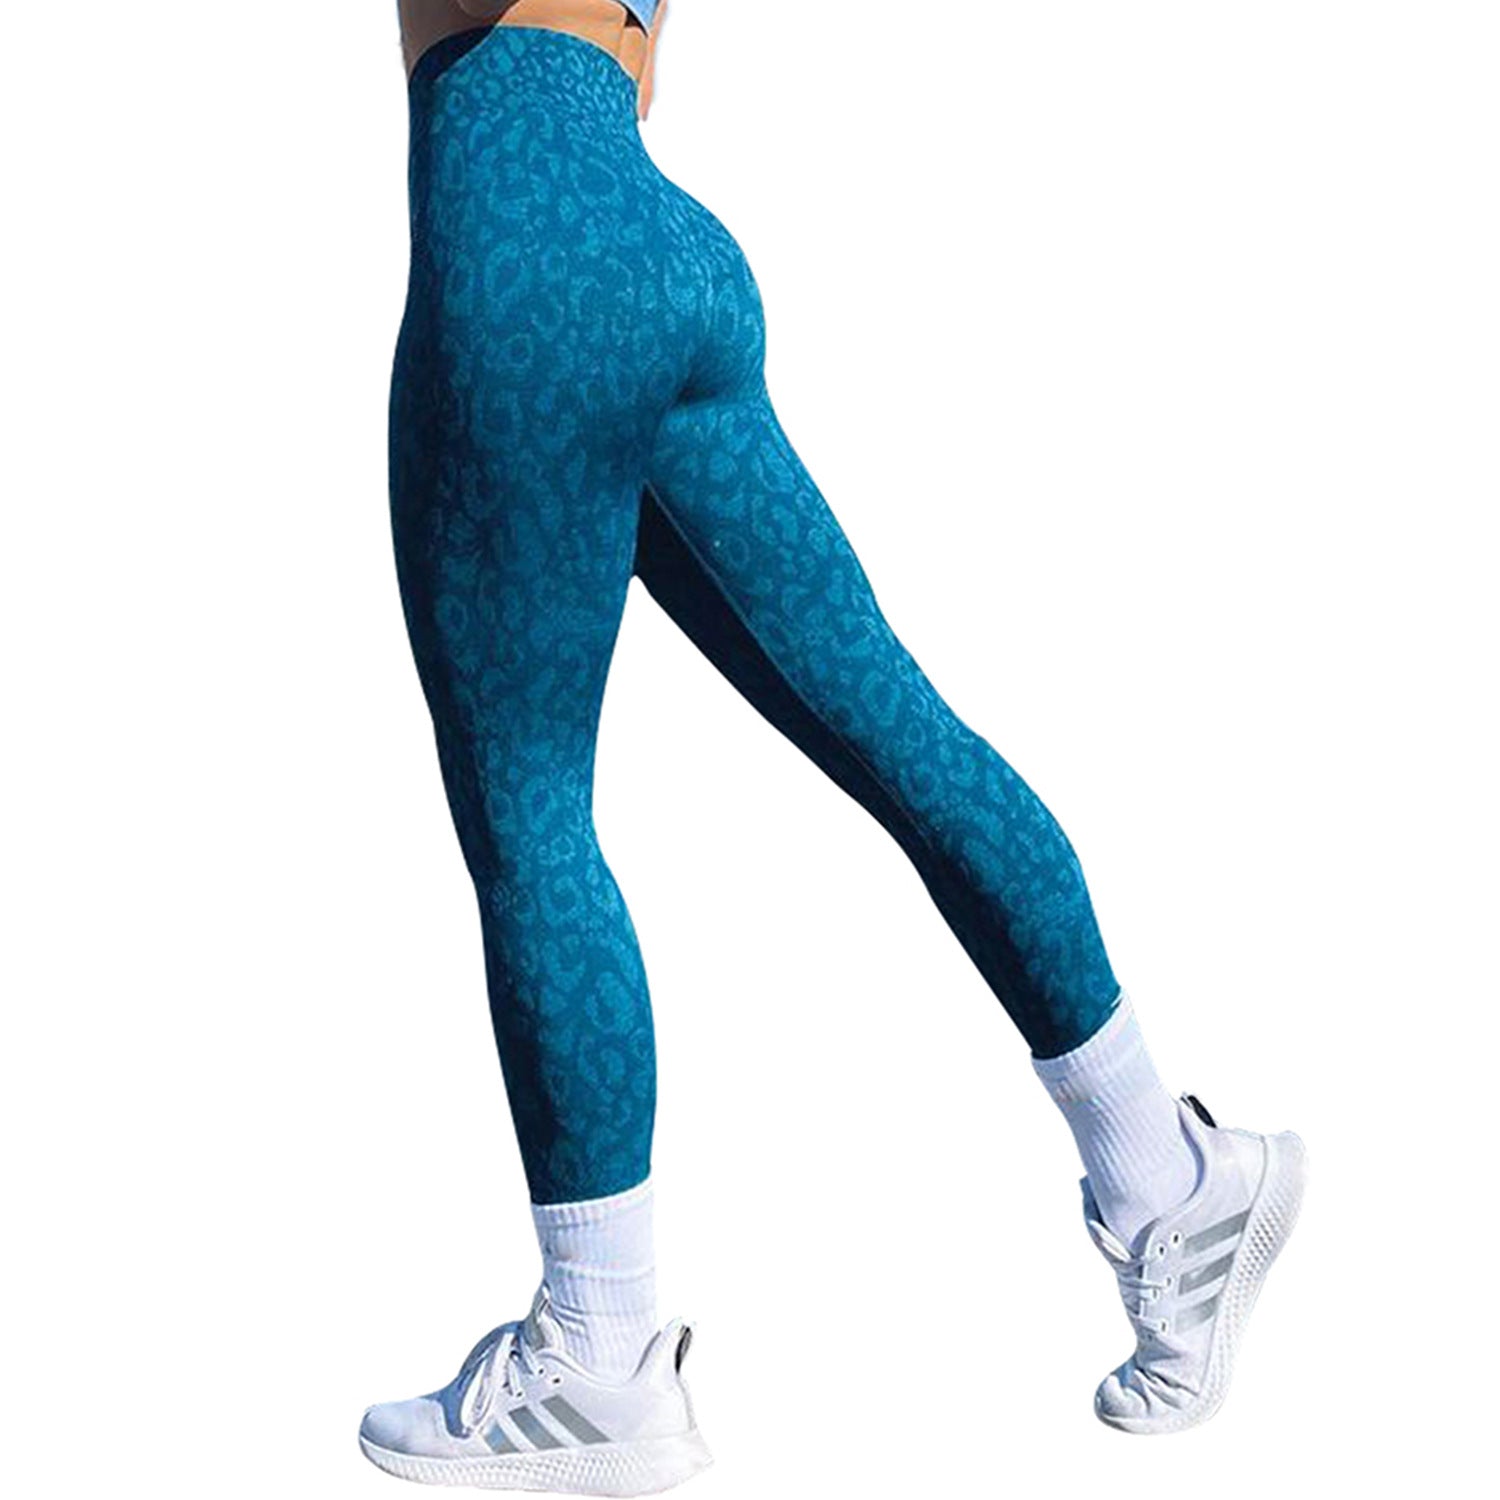 Butt Leggings For Women Push Up Booty Legging Workout Gym Tights Fitness Yoga Pants